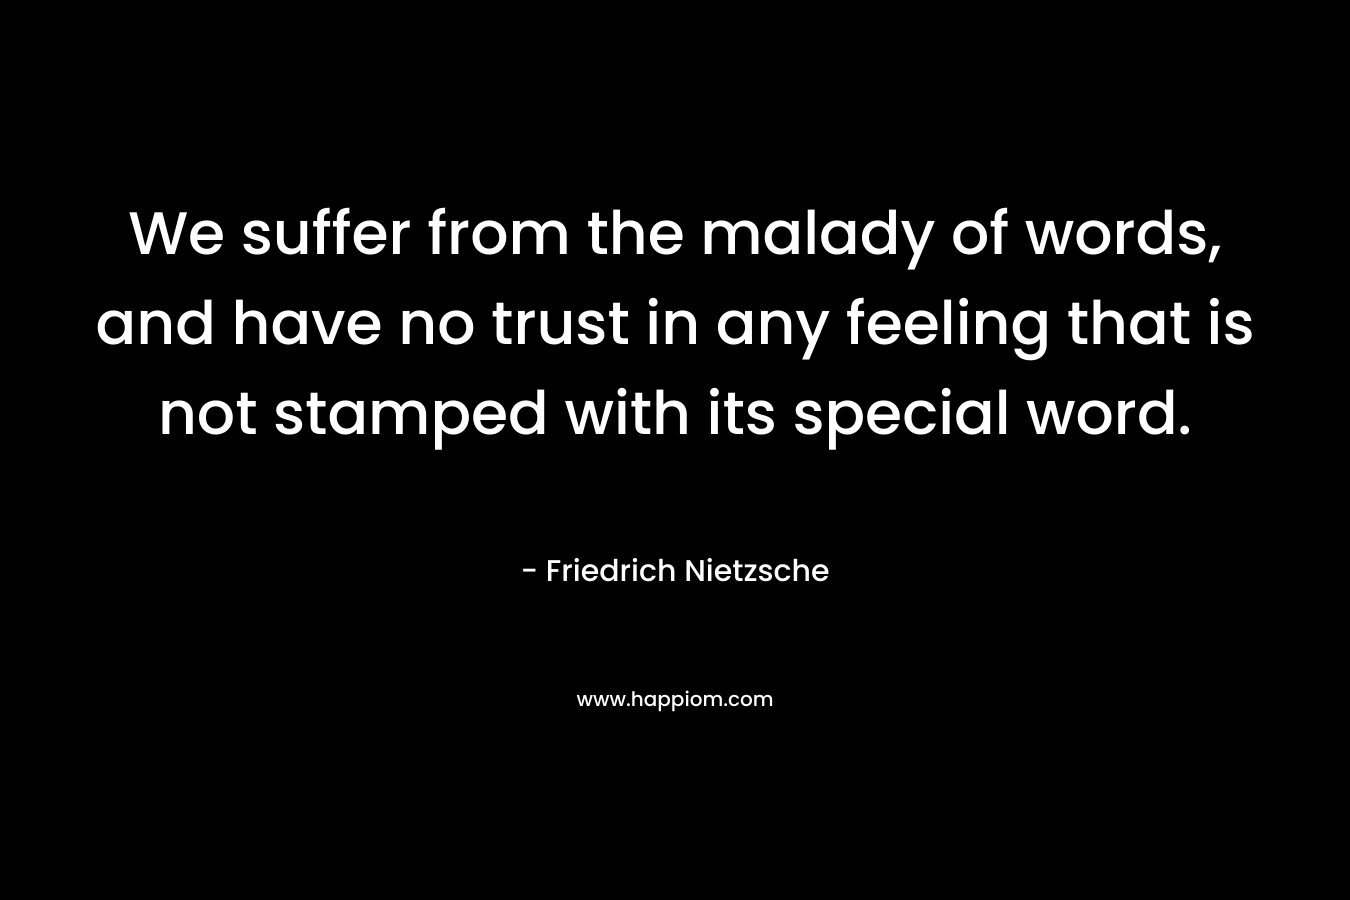 We suffer from the malady of words, and have no trust in any feeling that is not stamped with its special word.